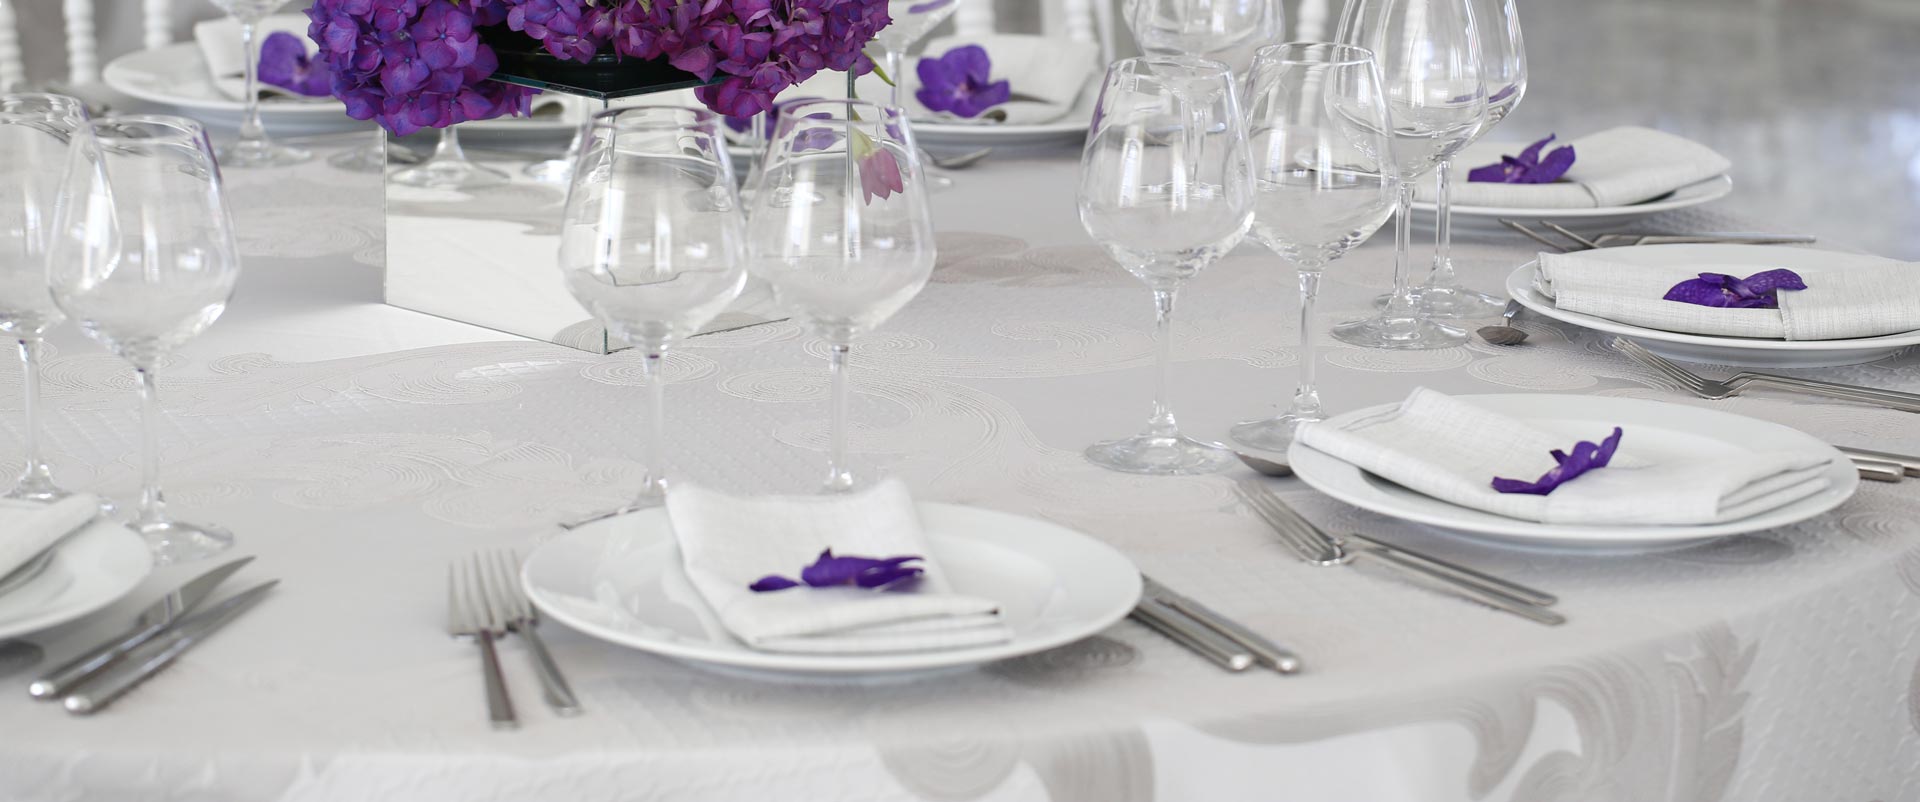 turn-your-event-into-a-fine-dining-experience-linen